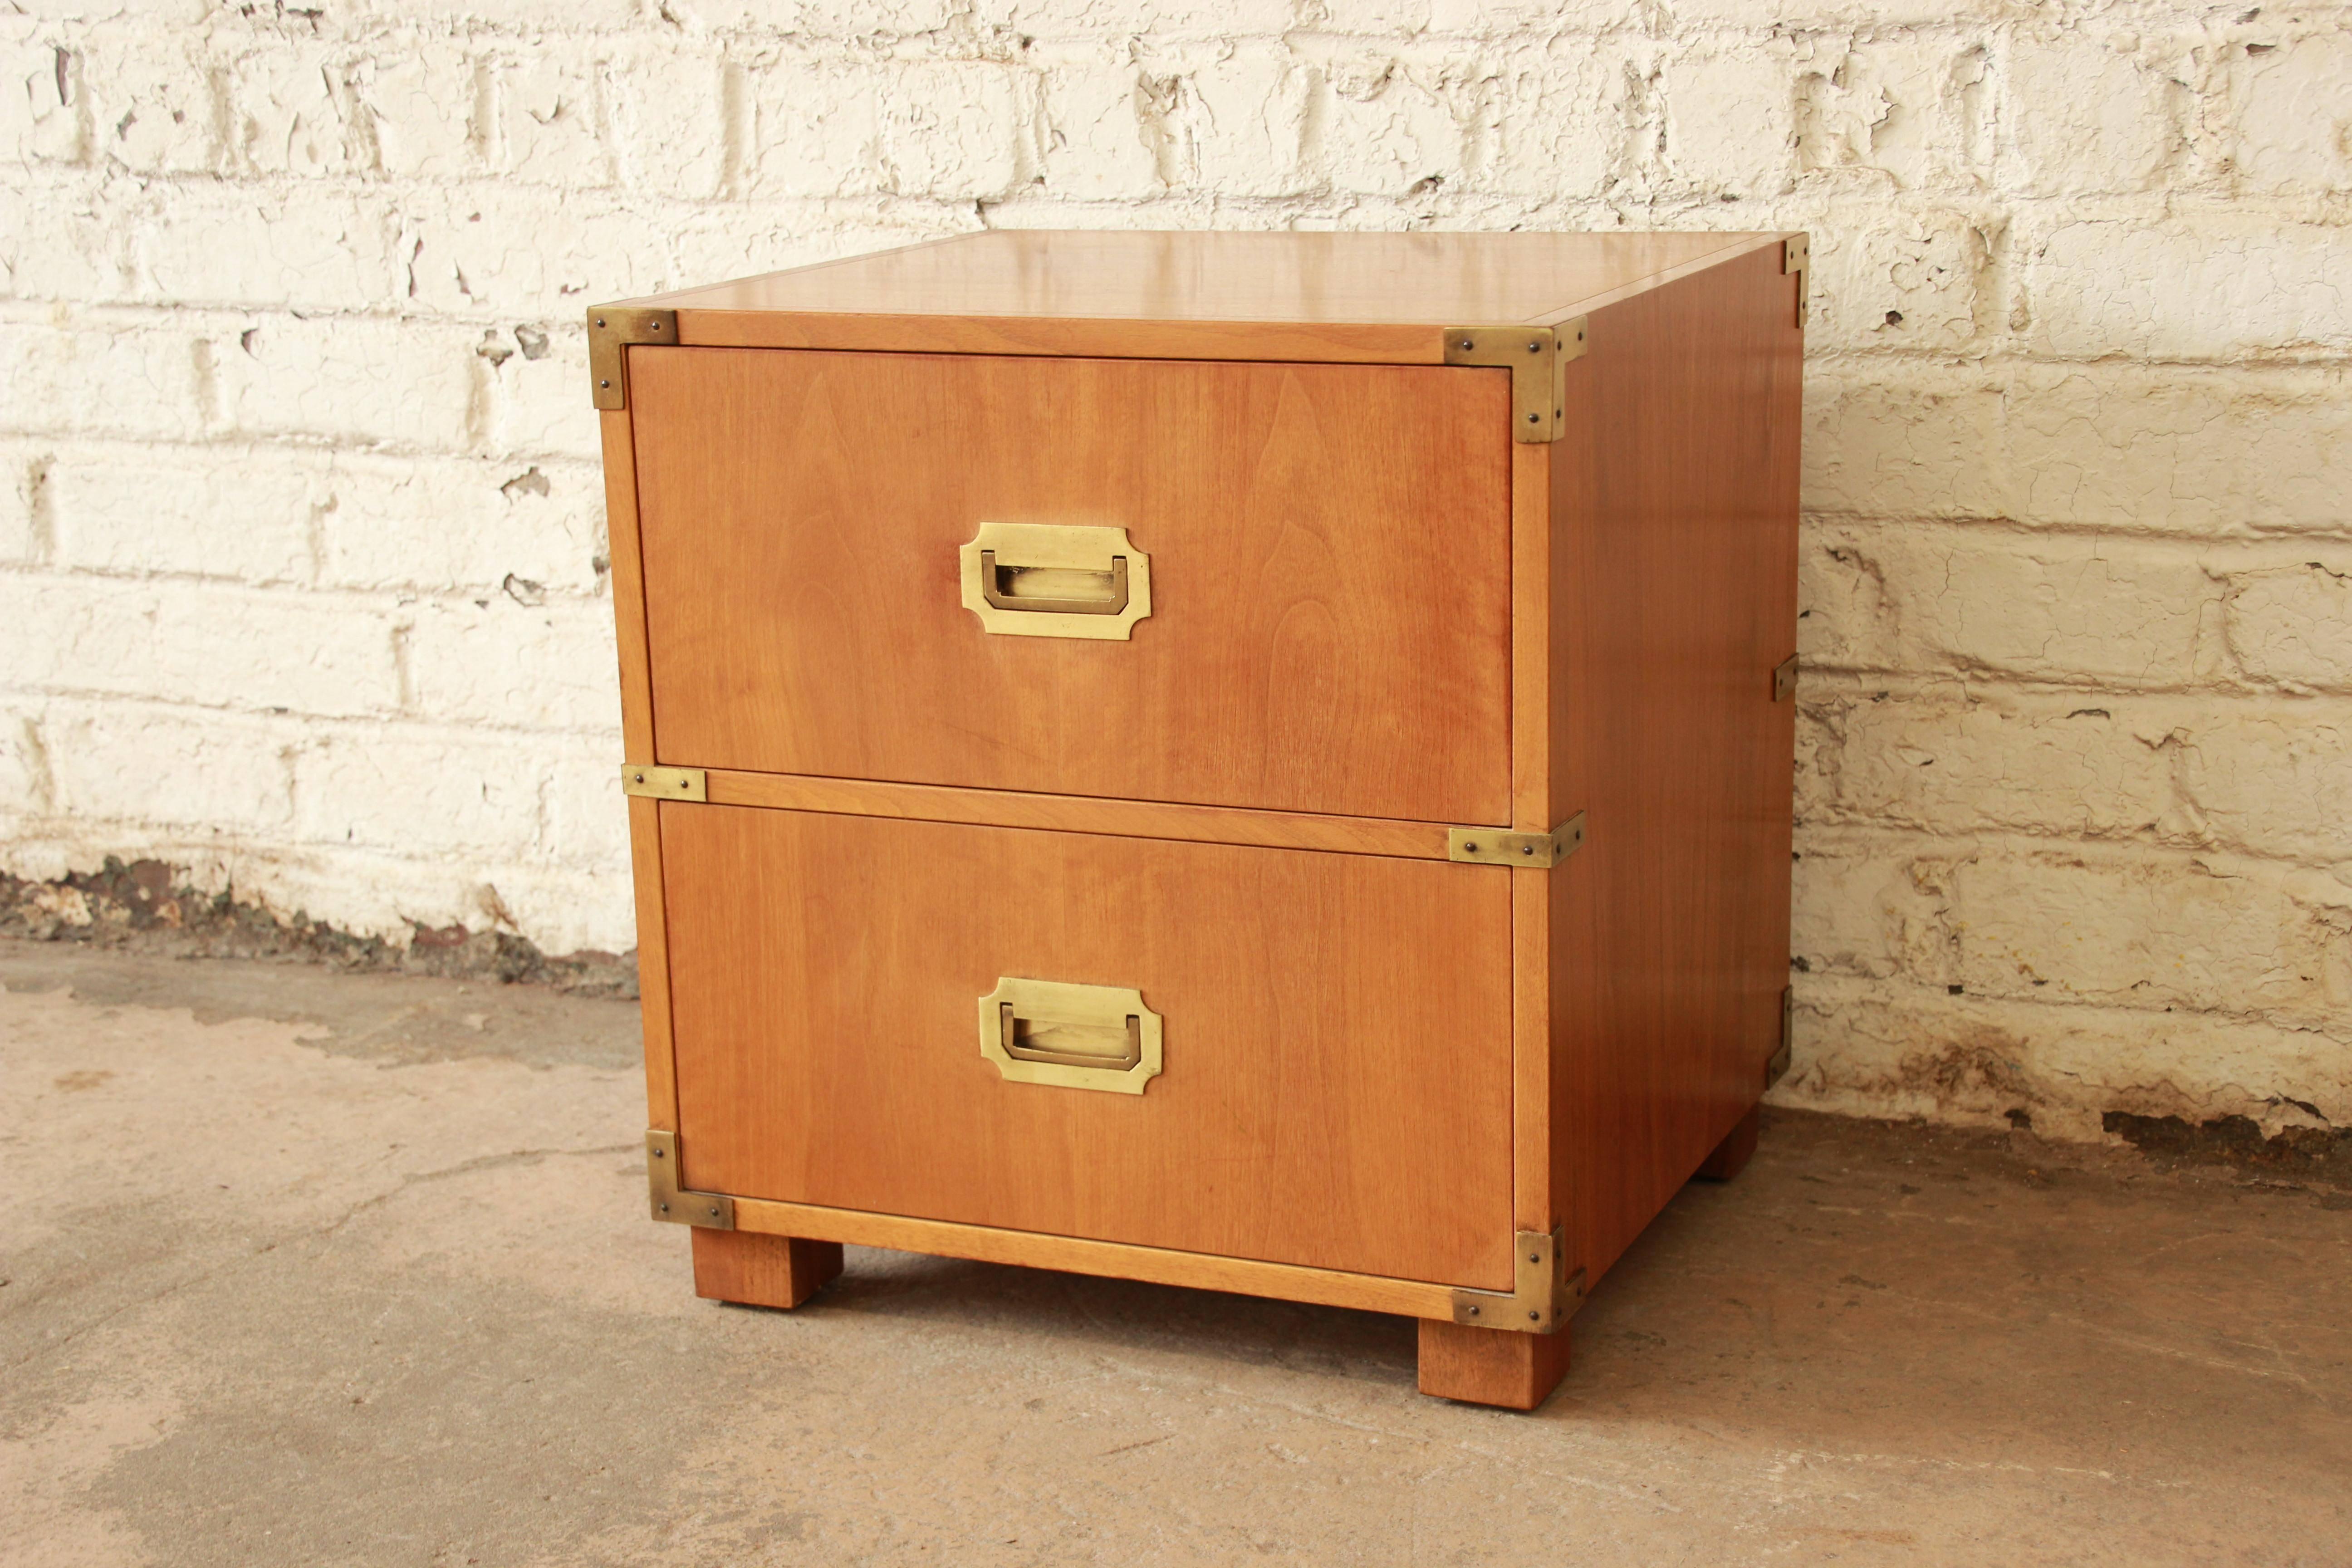 Gorgeous Mid-Century Campaign style nightstand or small chest by Baker Furniture Company. The chest features stunning bleached walnut wood grain and quality brass hardware. It offers good storage with a drop-front storage compartment and a deep